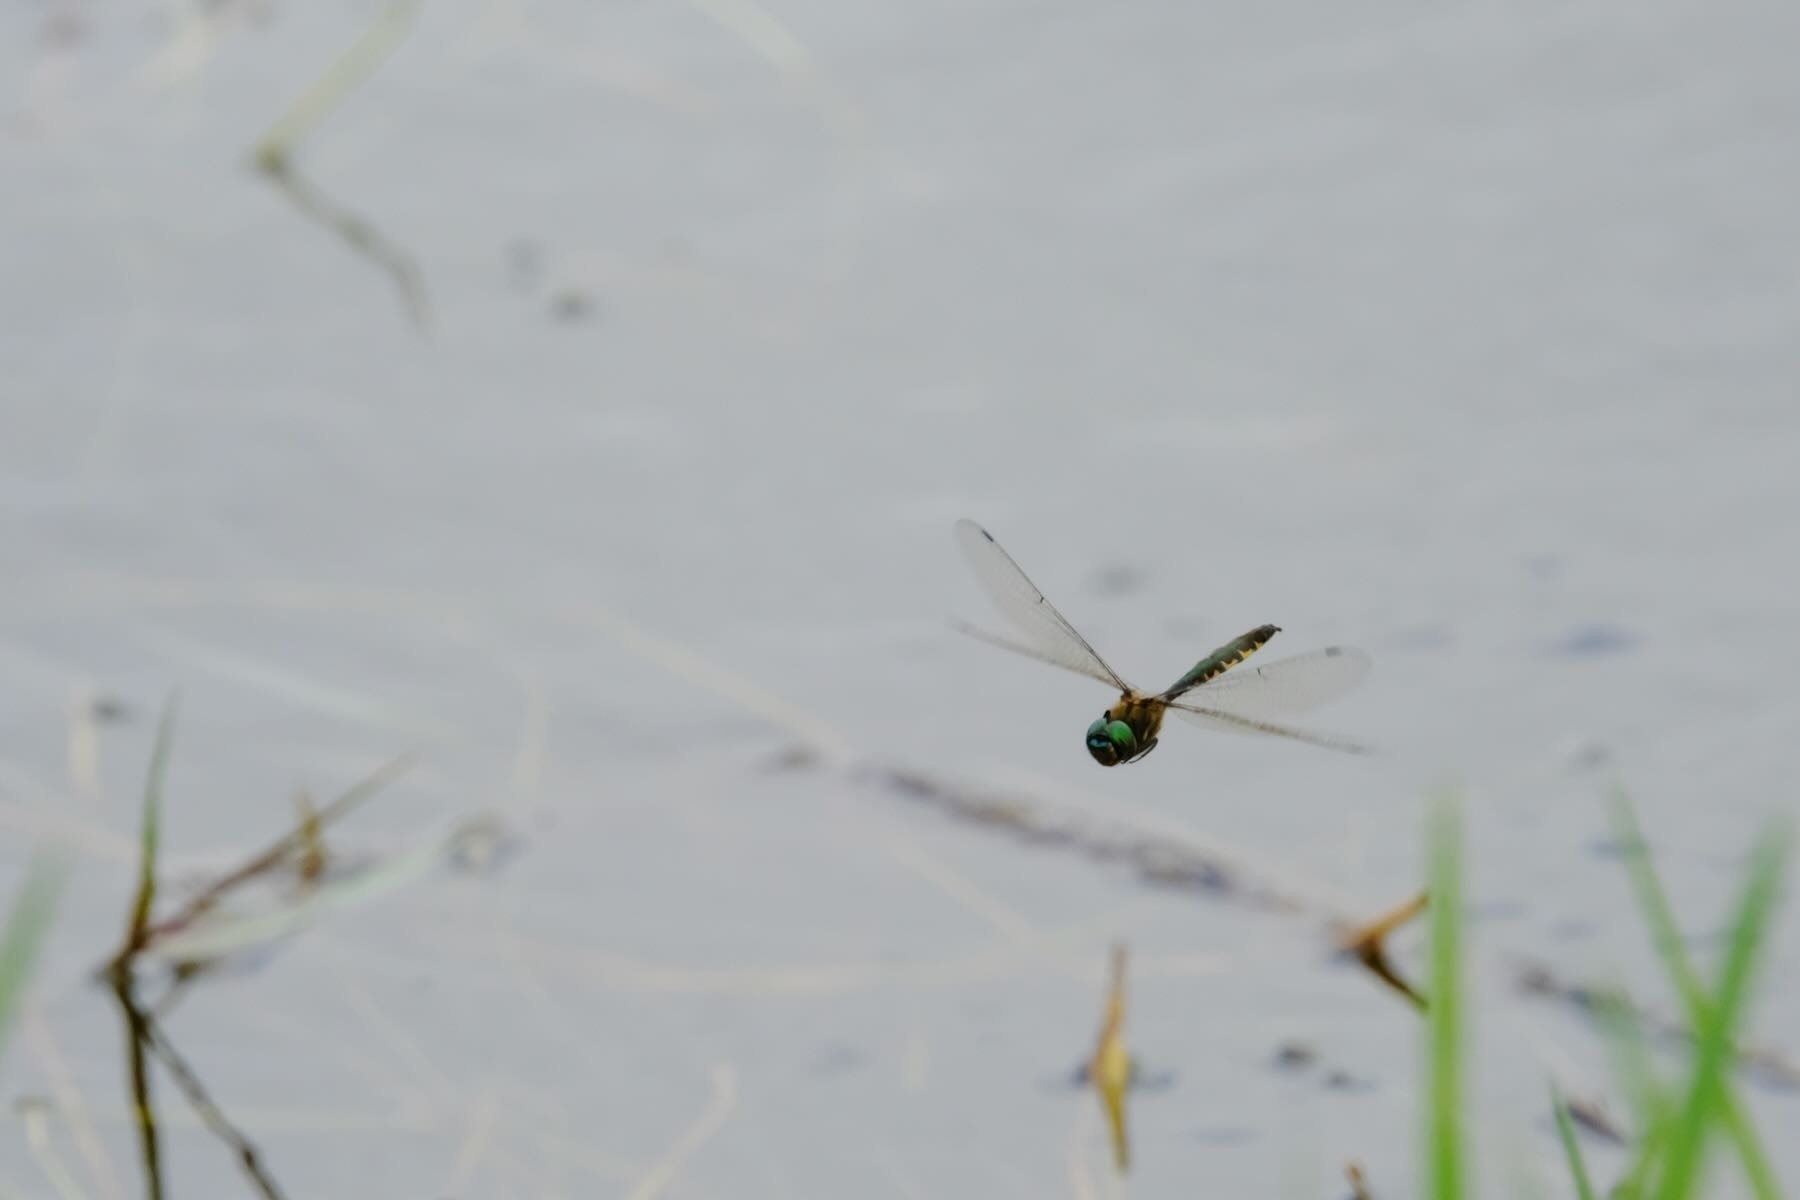 Dragonfly above the lake, near rushes. 